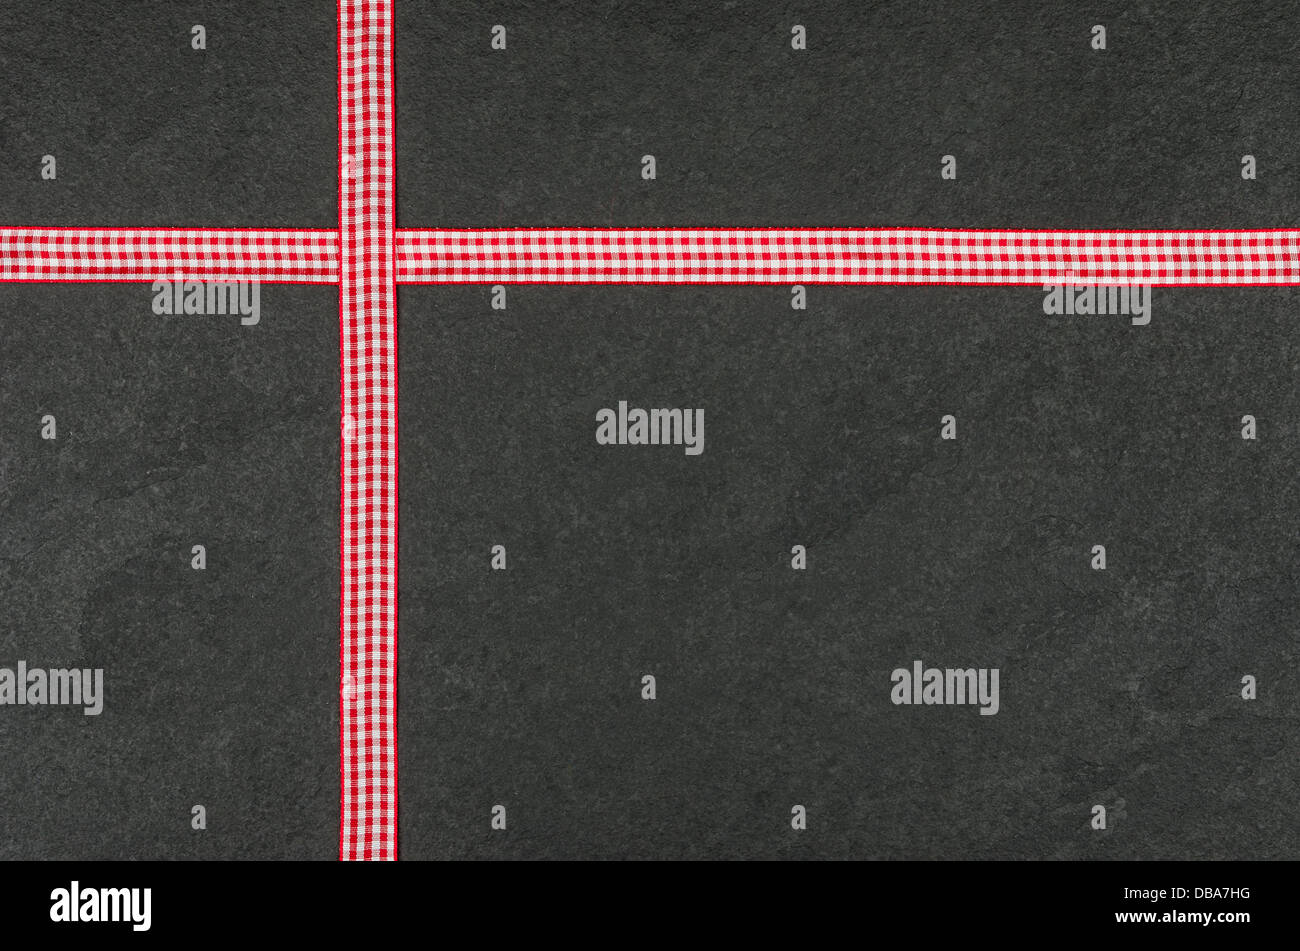 Slate plate with checkered ribbons Stock Photo